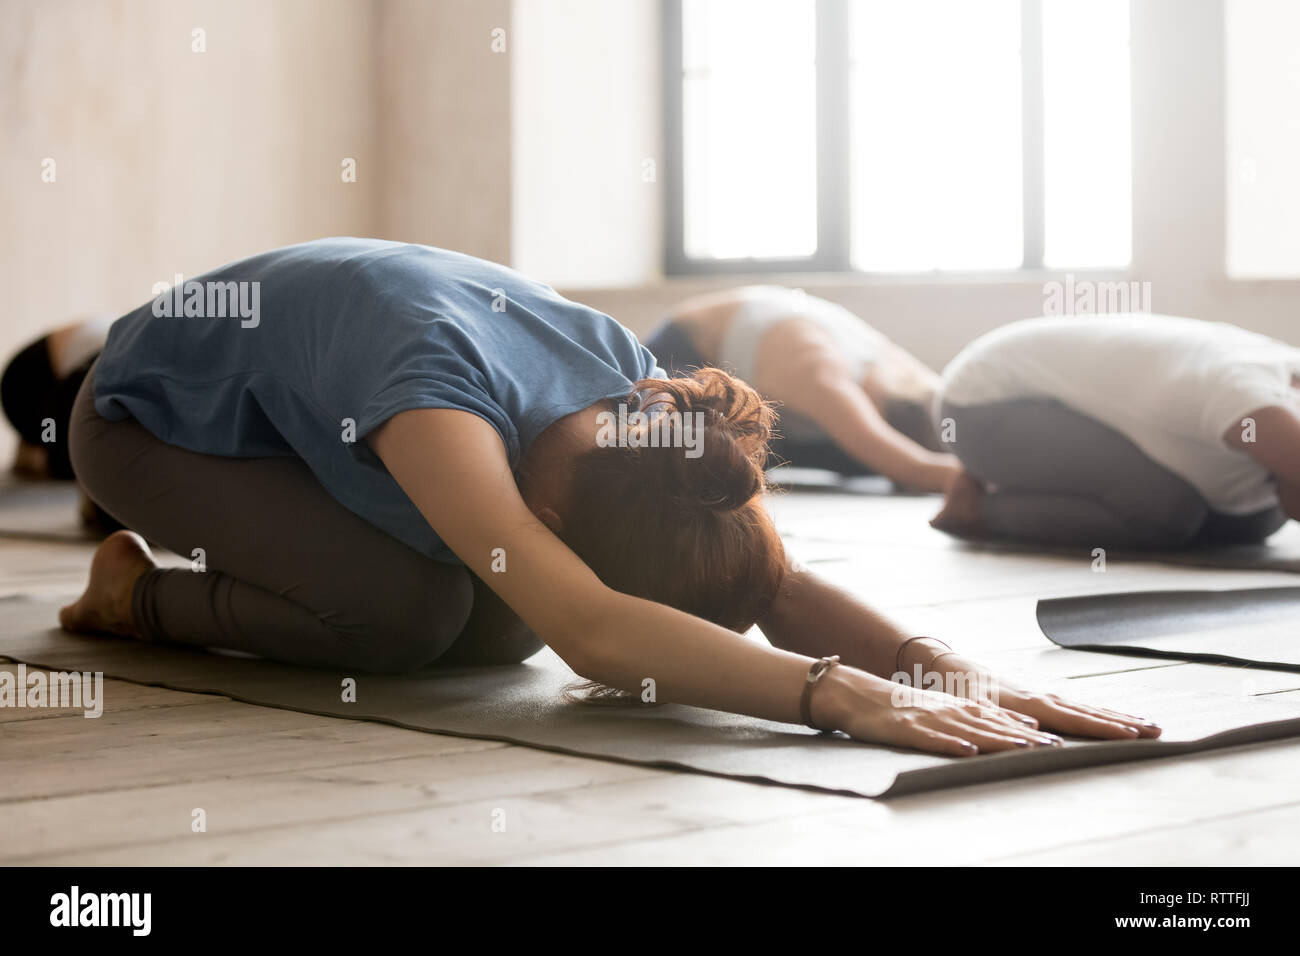 Group of people practicing yoga, doing Child pose, close up Stock Photo